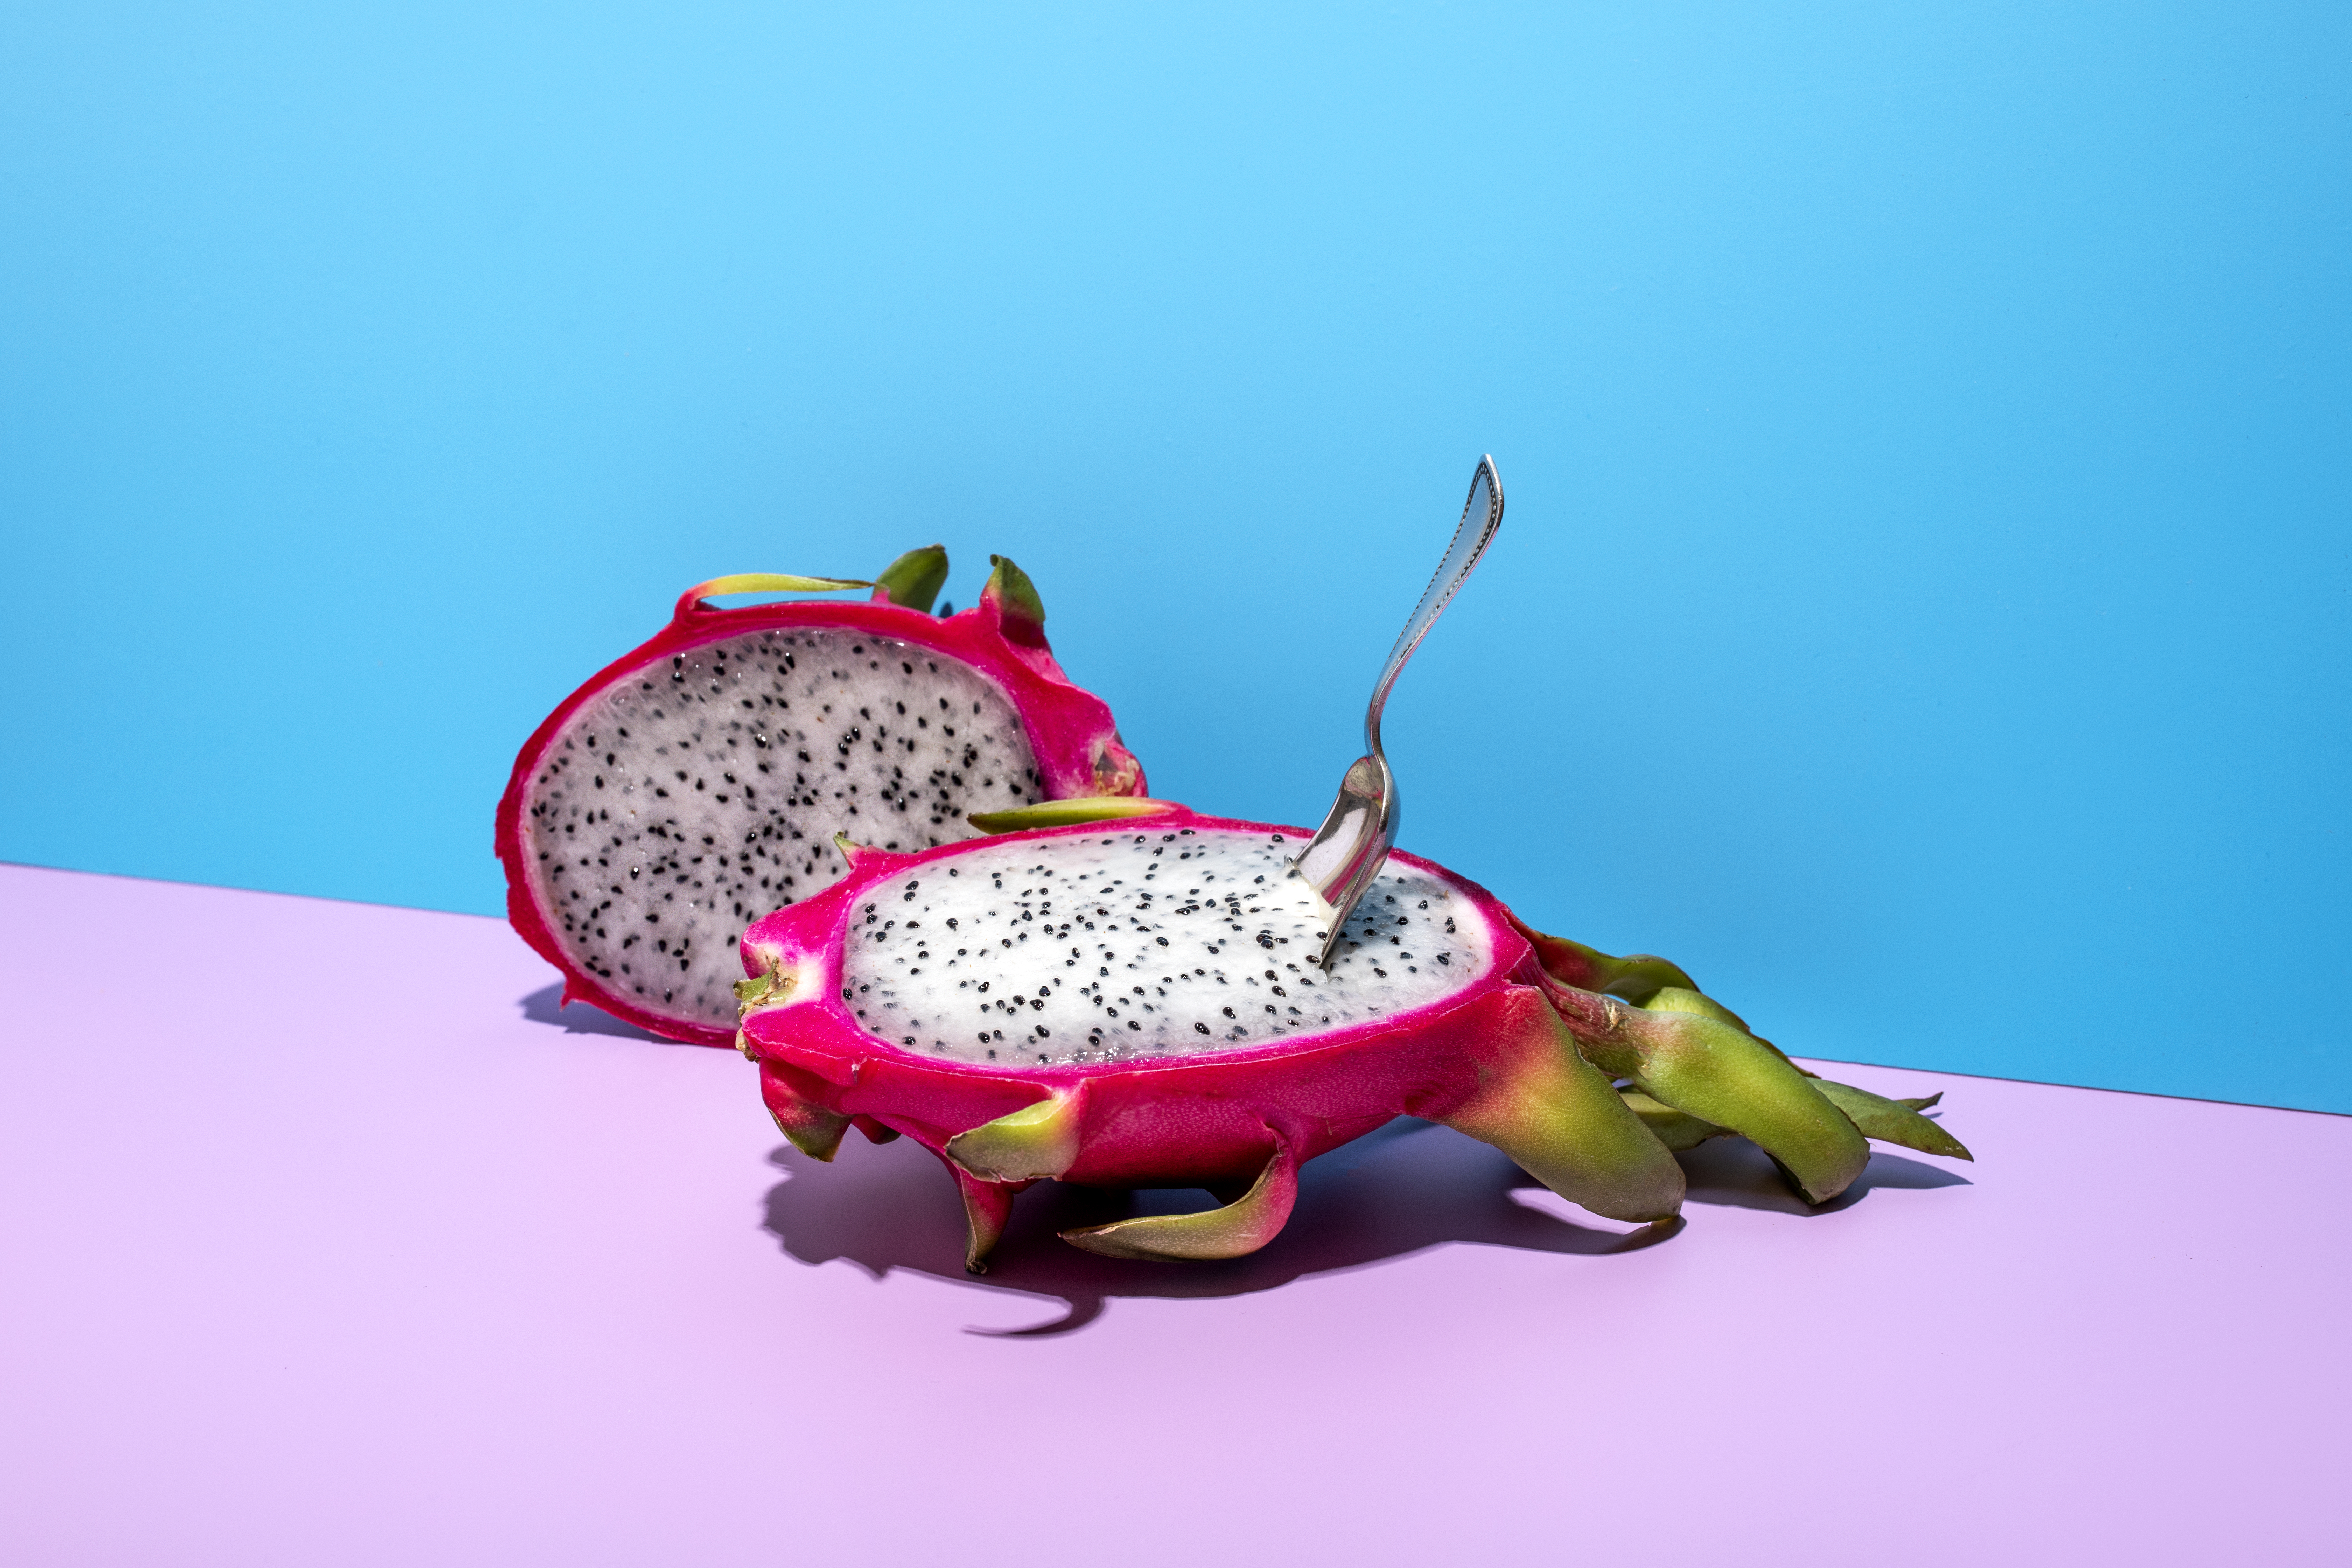 A dragon fruit sliced in half | Source: Getty Images